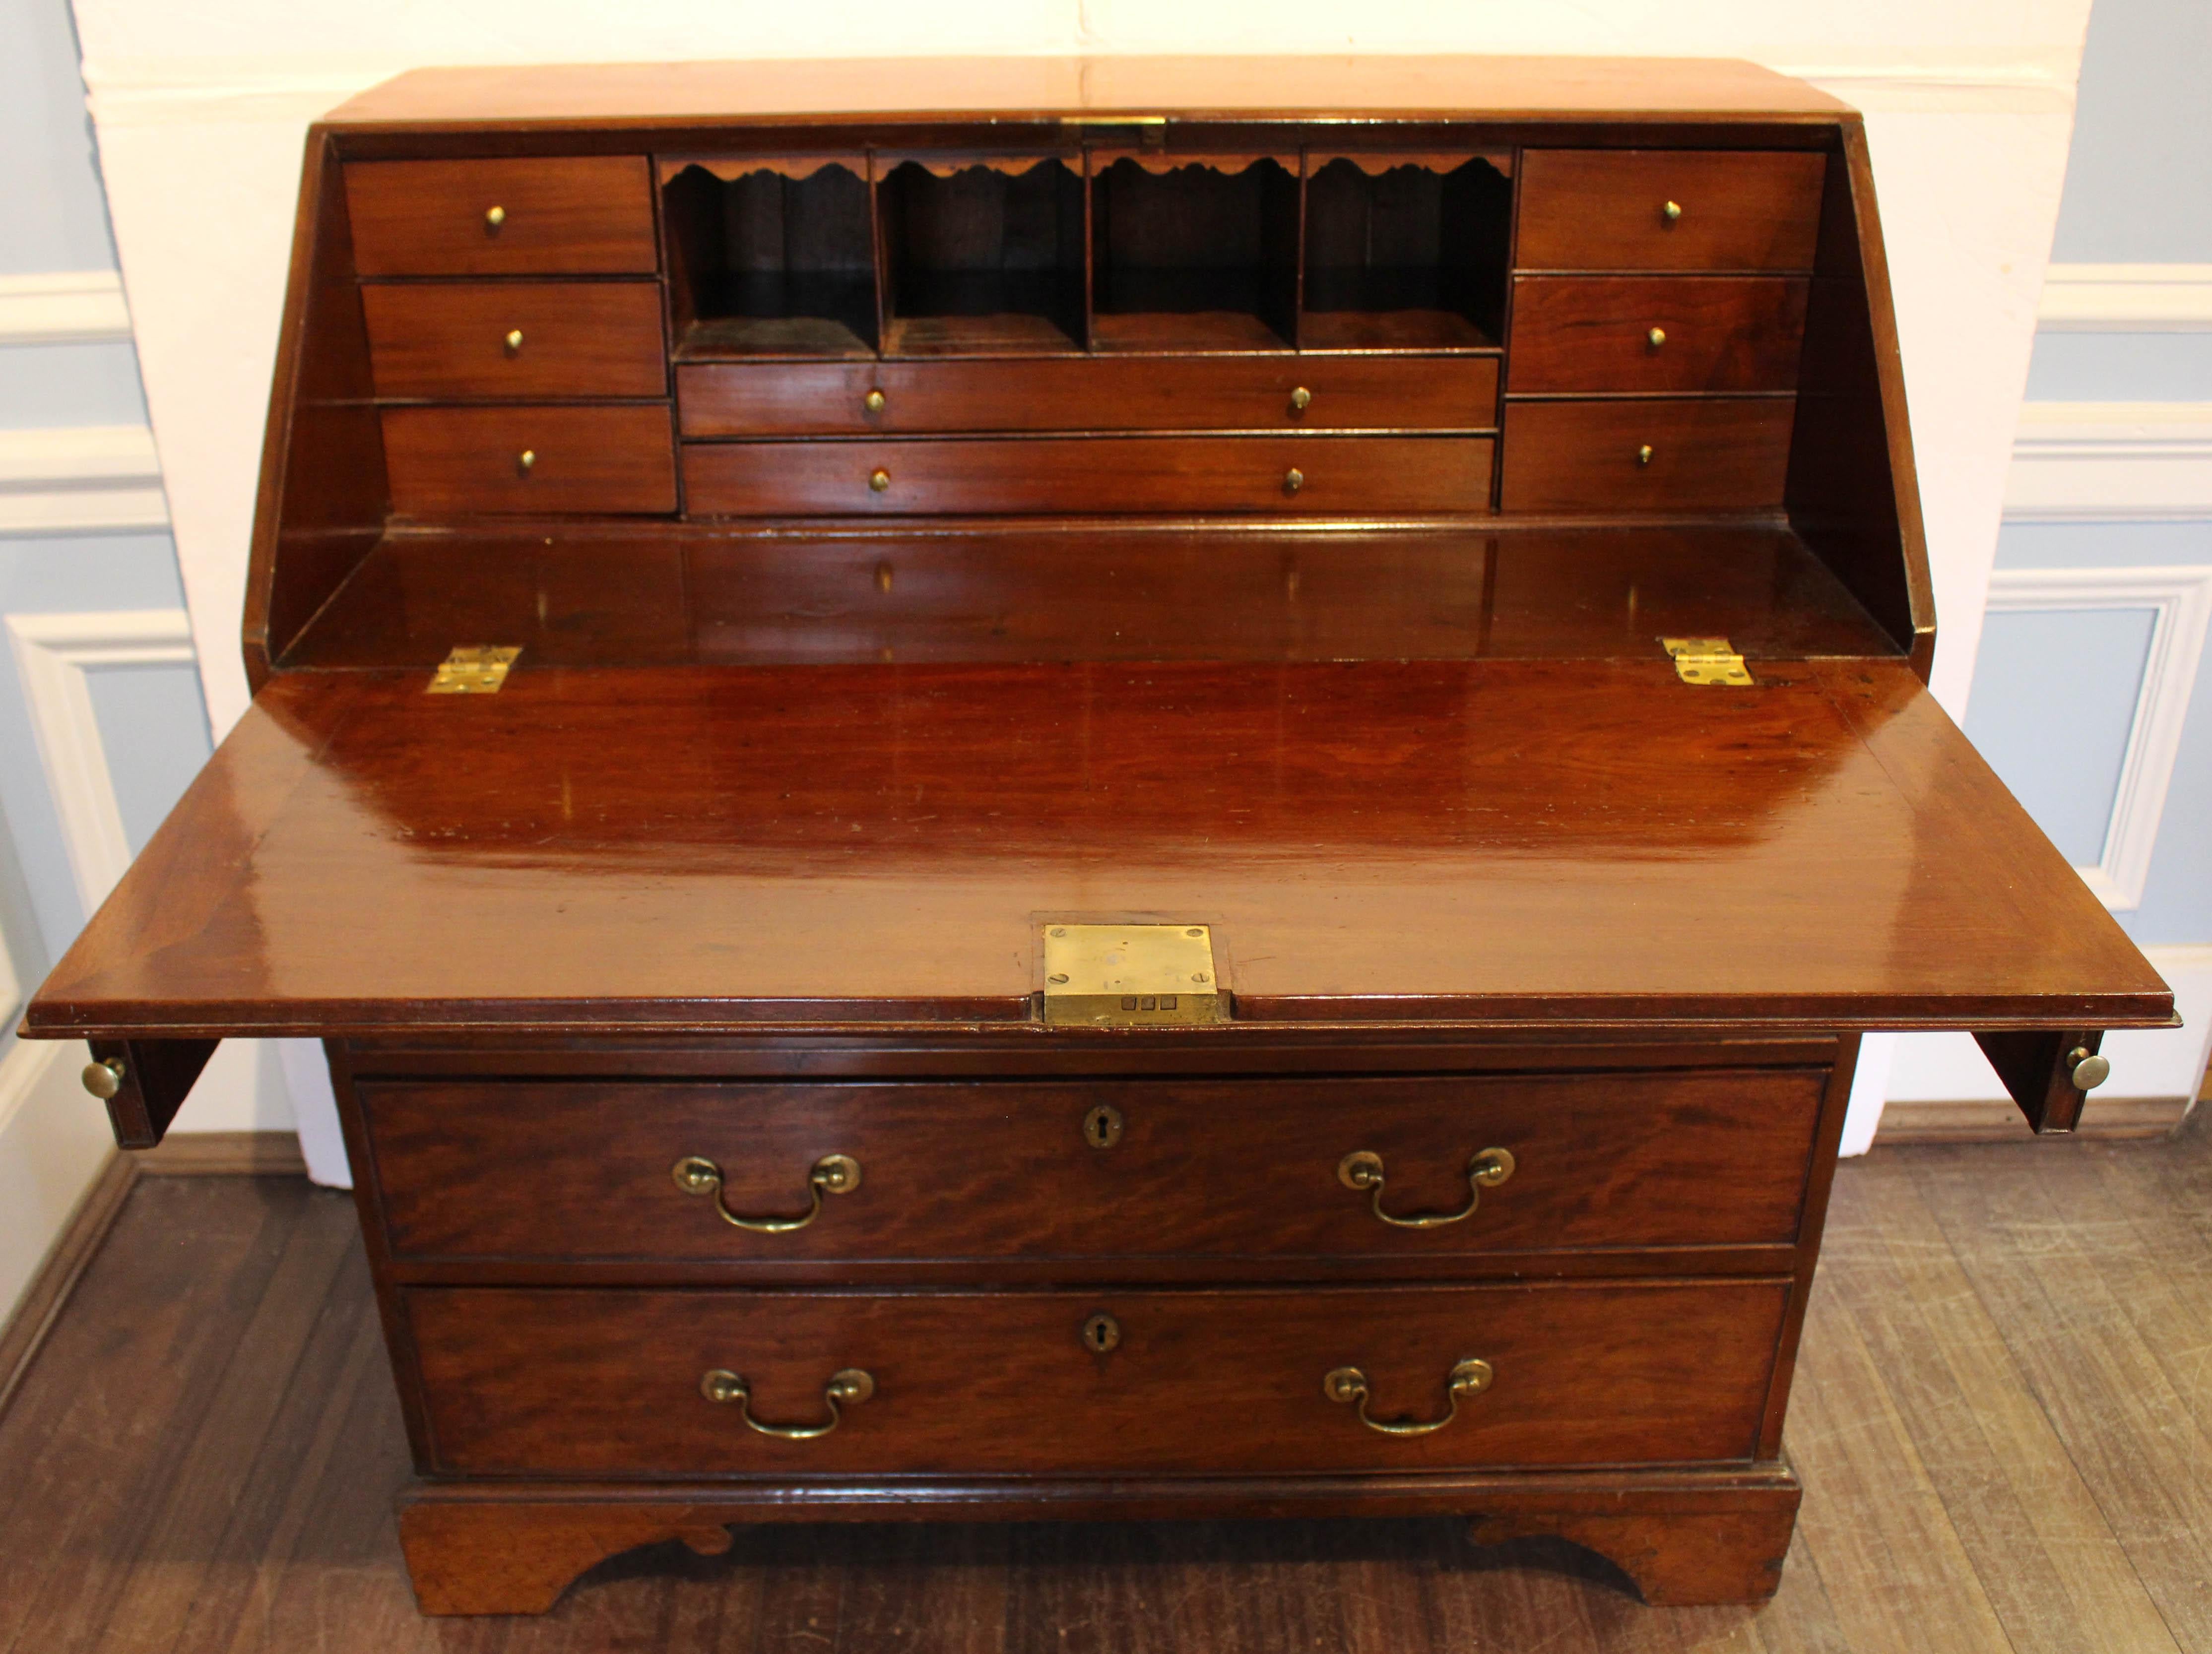 Circa 1760-80 George III Period Slant Front Bureau, English In Good Condition For Sale In Chapel Hill, NC